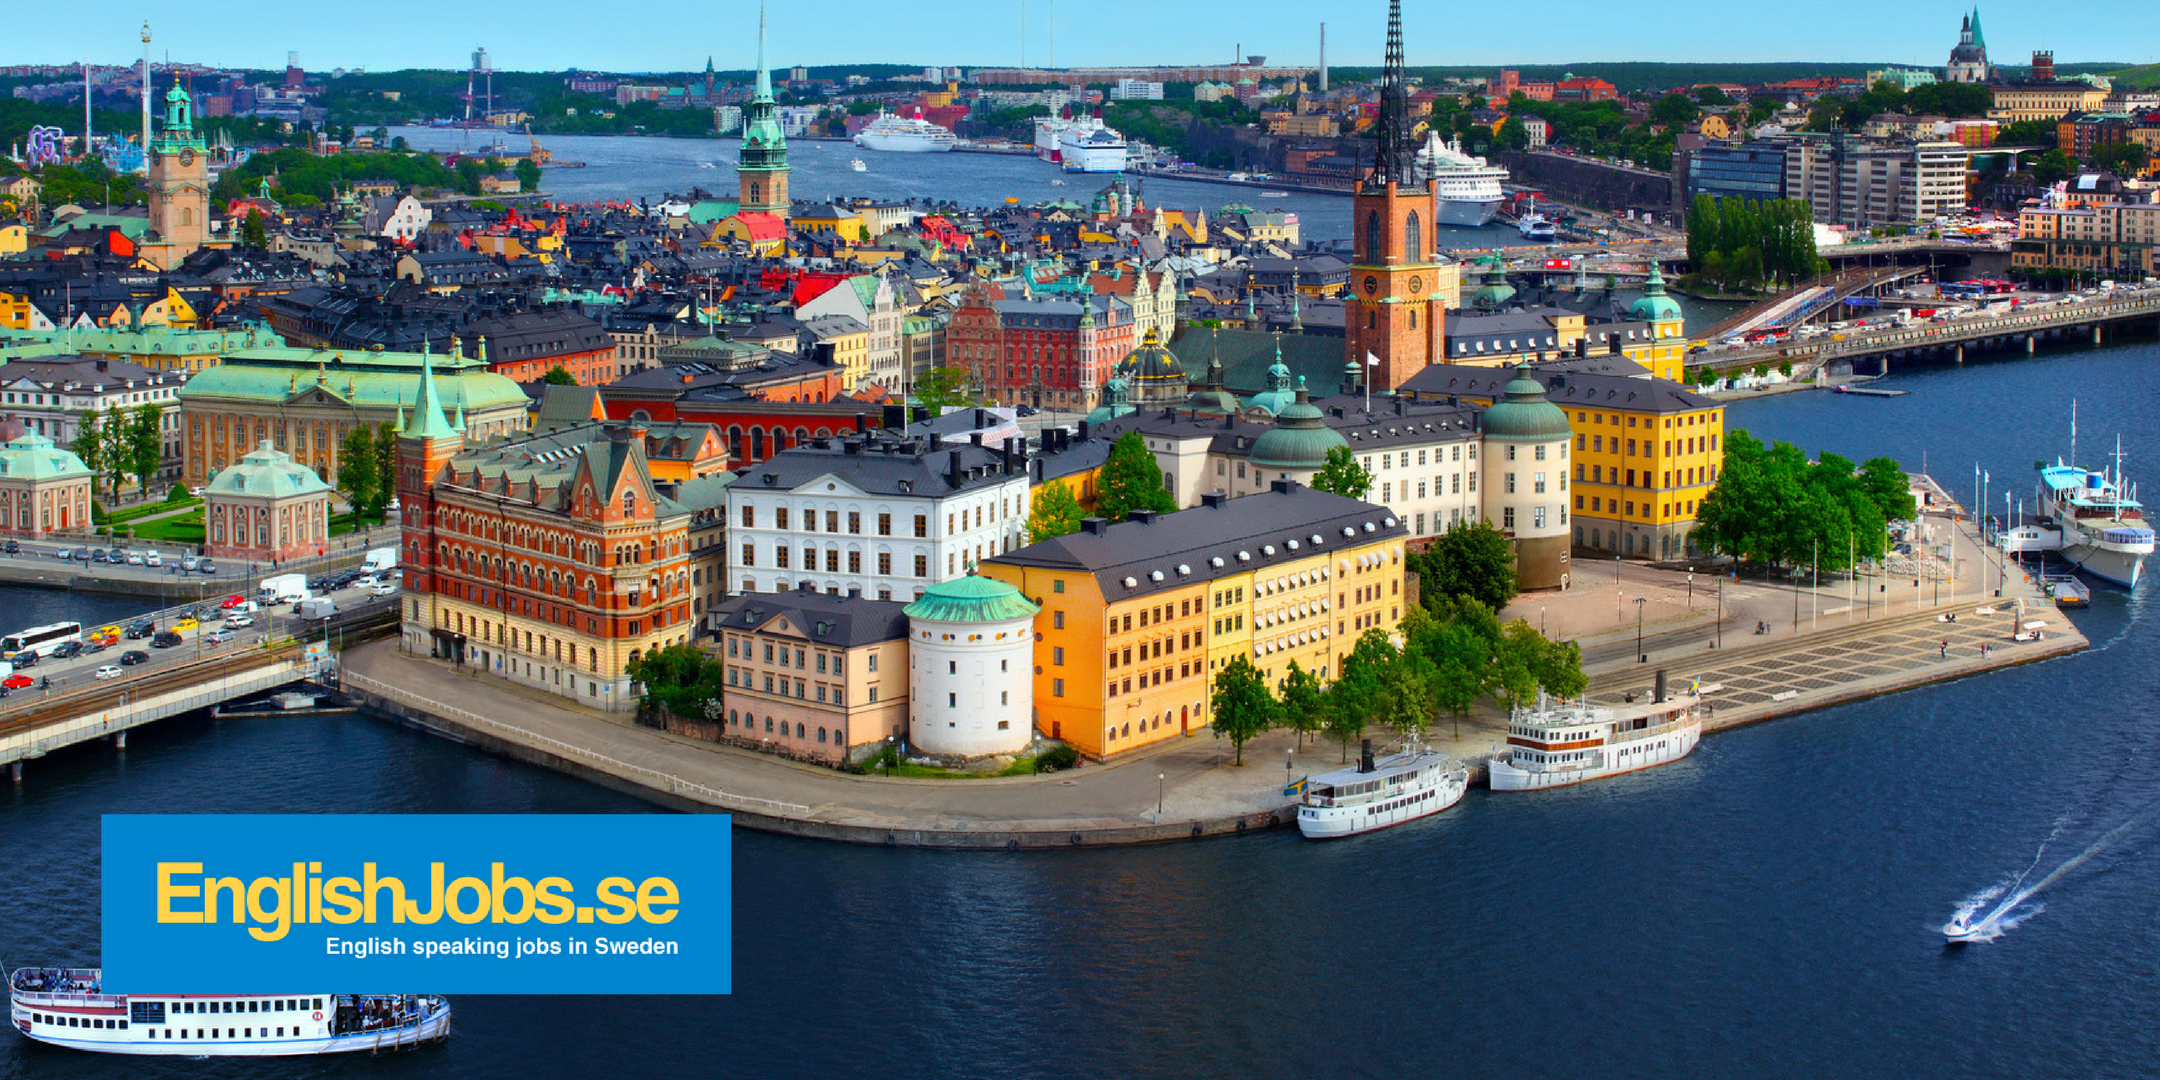 Work in Europe (Sweden, Denmark, Germany) - Your job search from Seattle to Stockholm